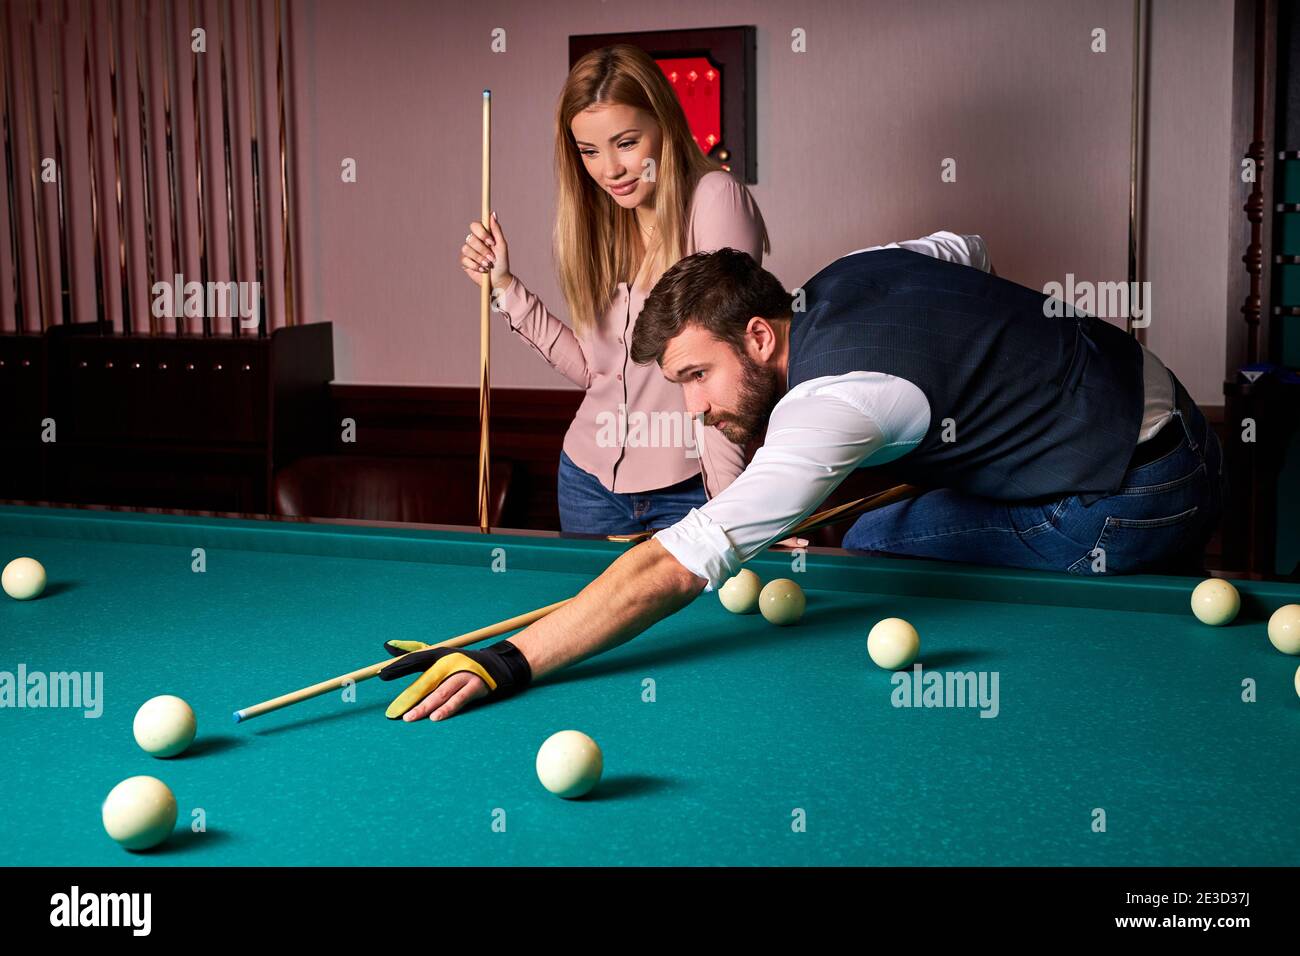 Pretty Young Women In Tops And Panties Playing Snooker In Modern Interior  House. Free Time, Weekend With Friends Concept Stock Photo, Picture and  Royalty Free Image. Image 112013795.